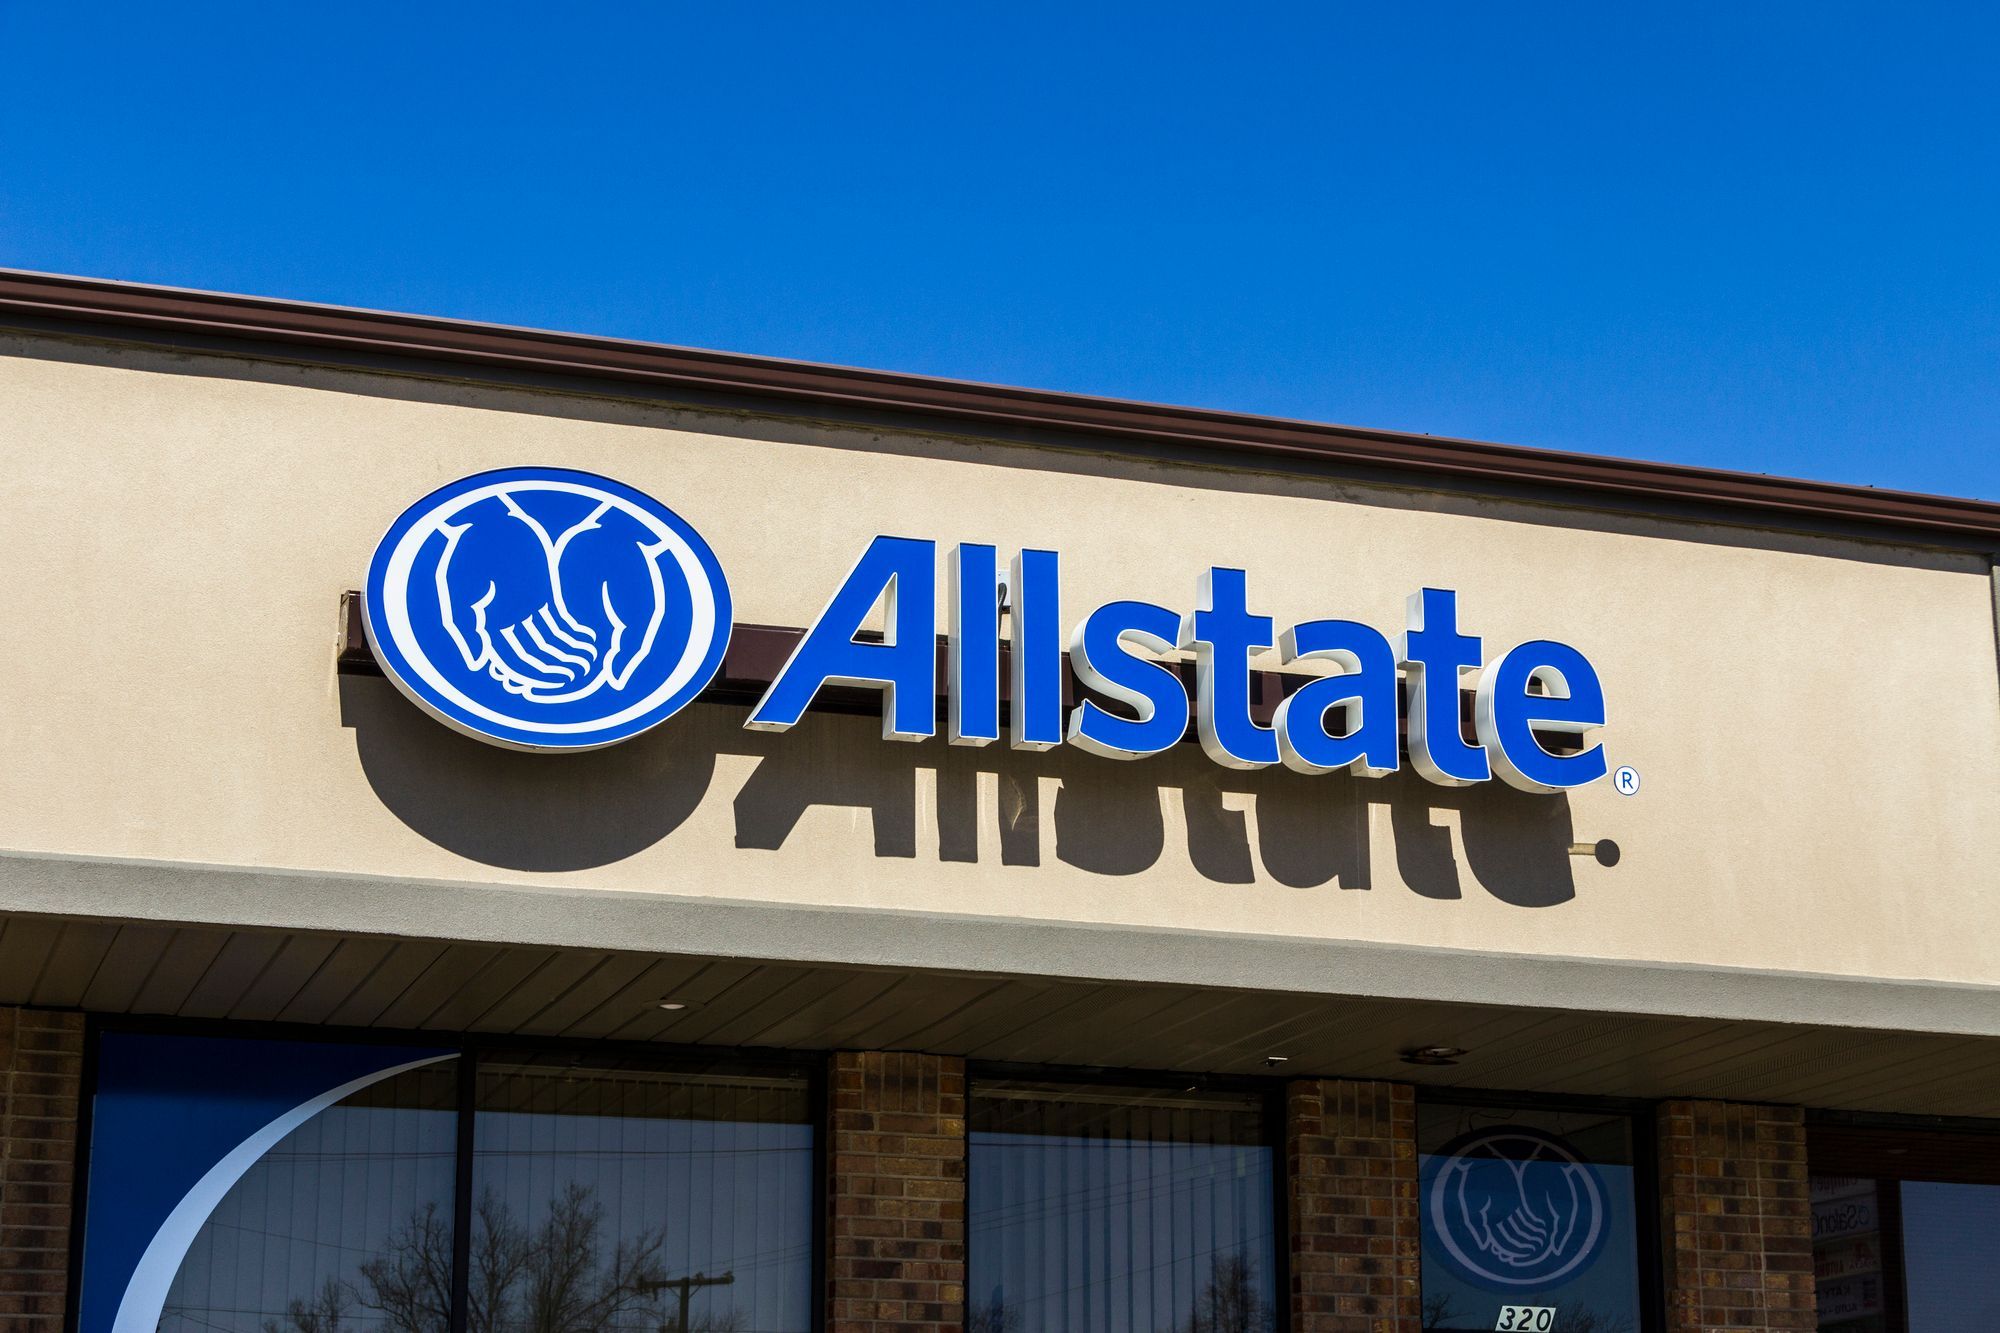 Allstate Insurance Company logo regarding the Allstate Insurance class action lawsuit filed